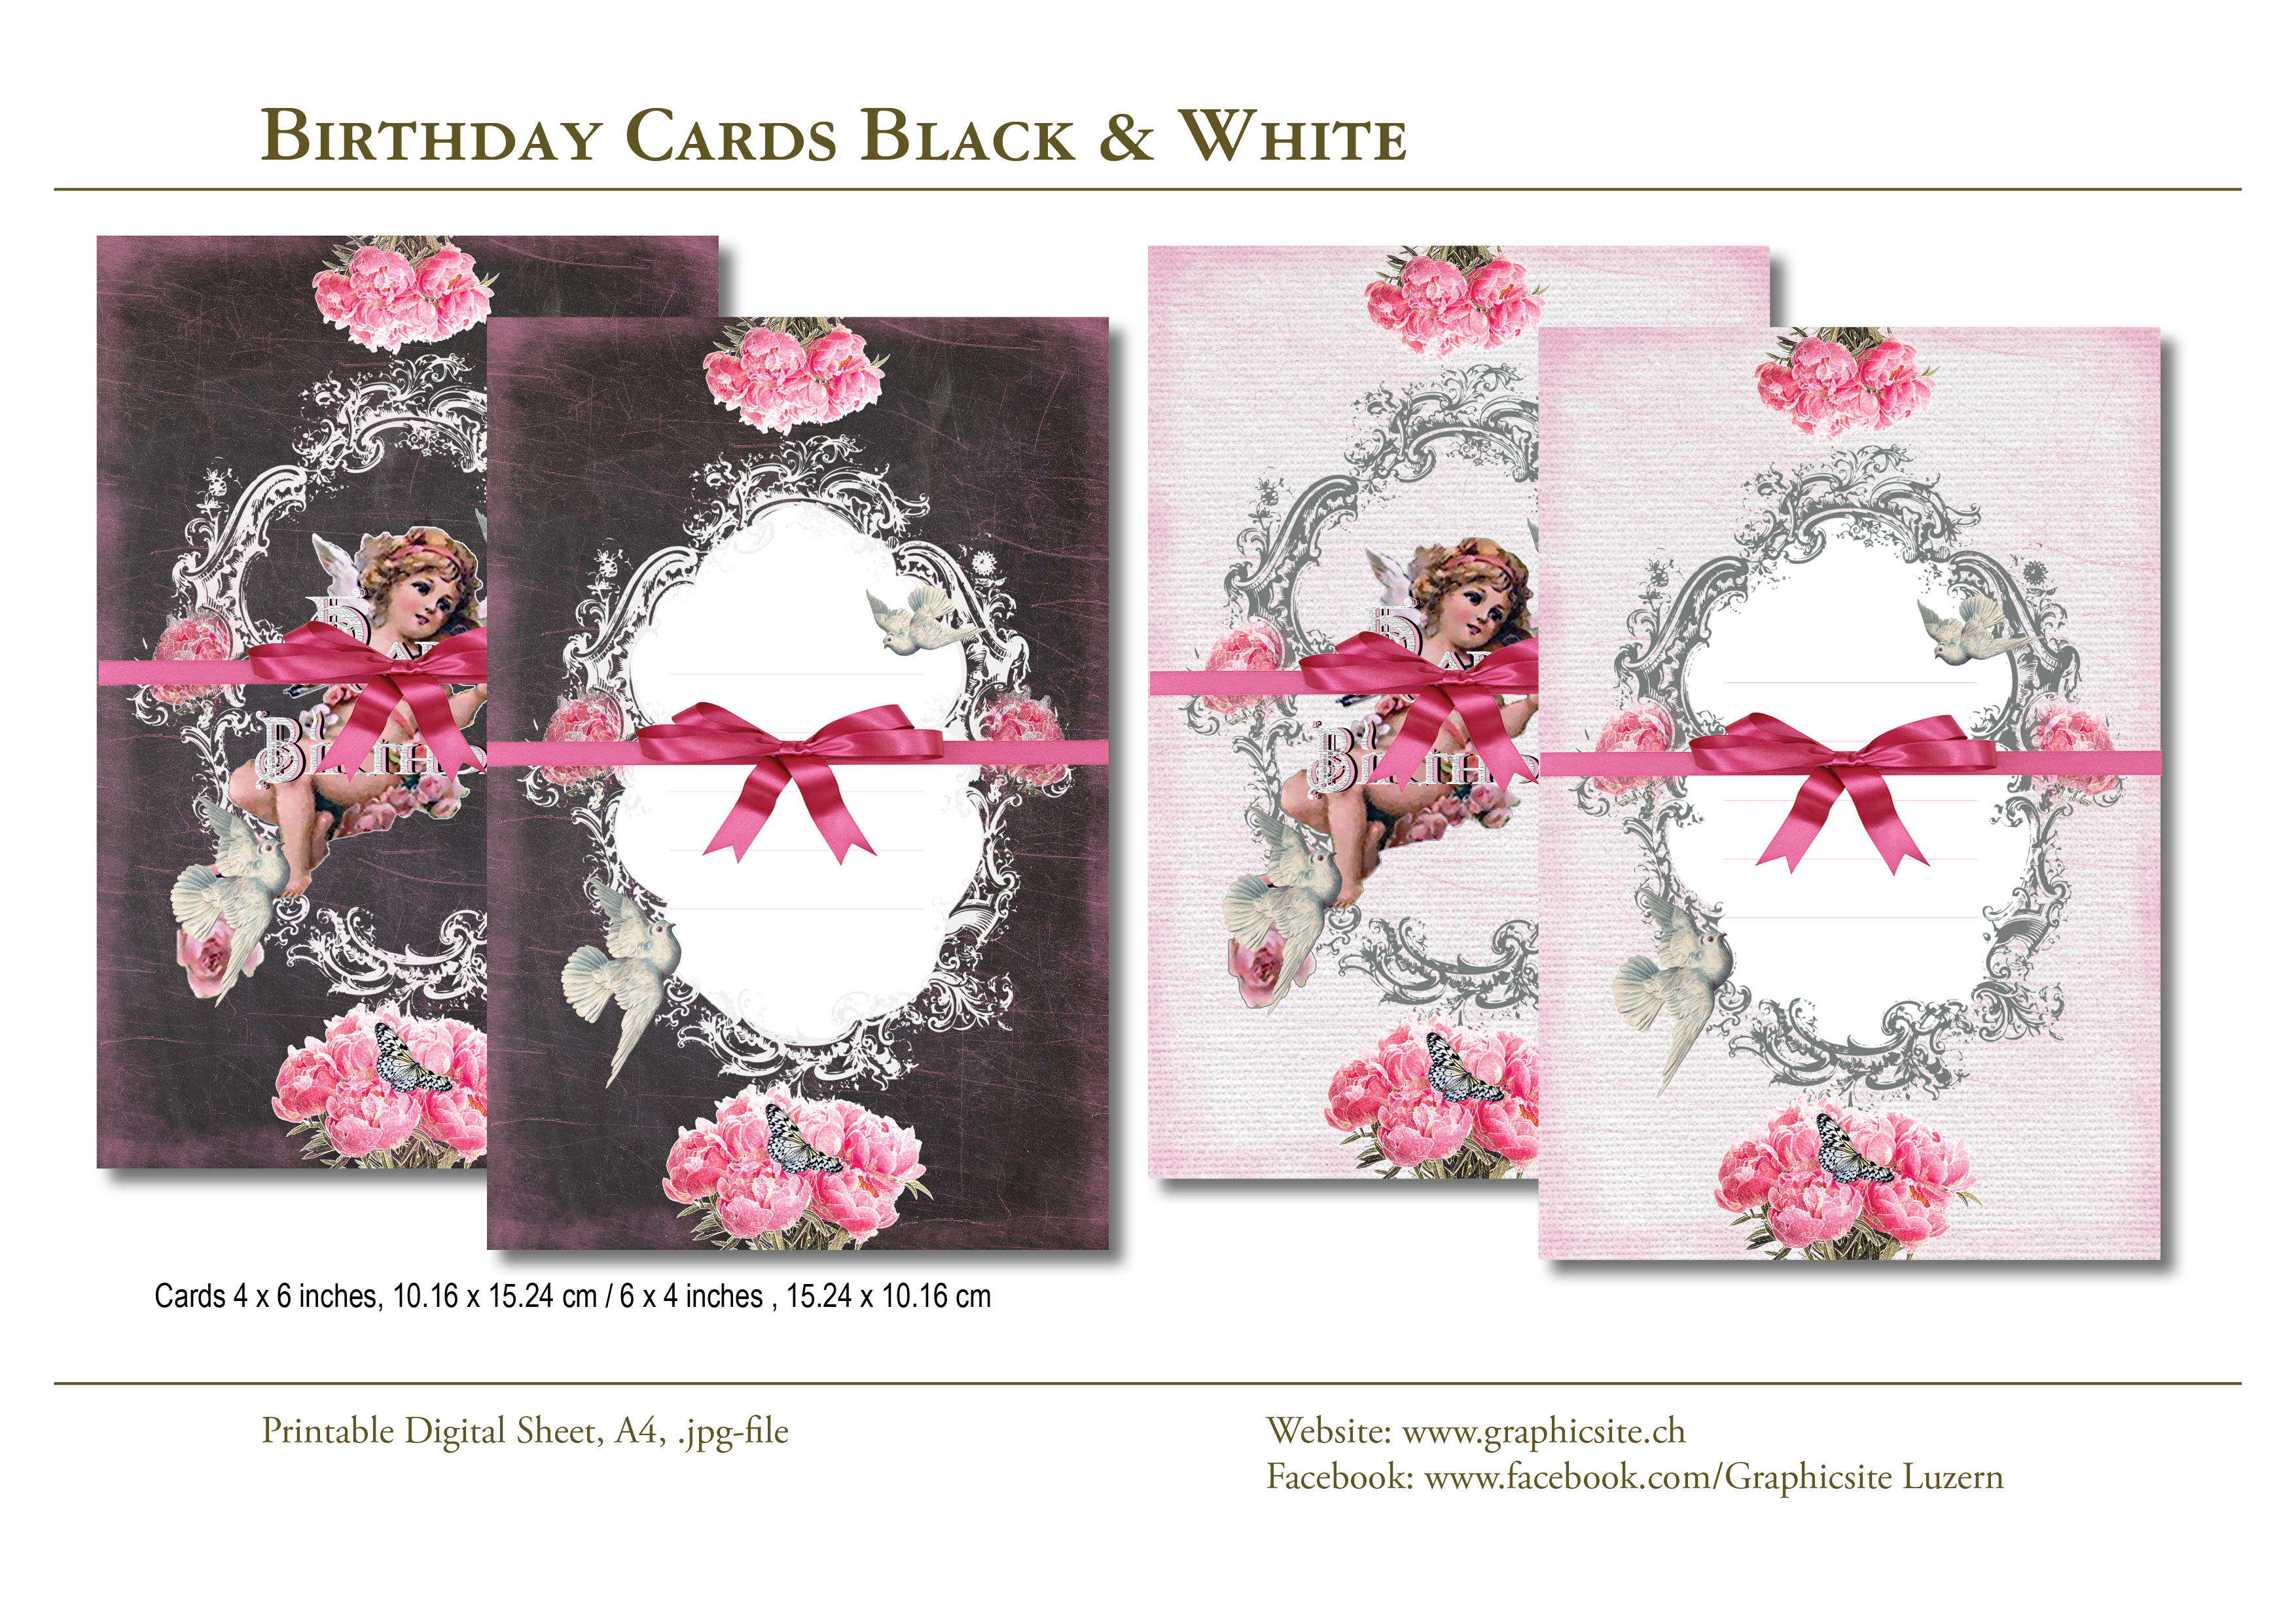 Printable Sheets - Cards 4x6 images - Birthday - BlackWhite, Angel, Roses